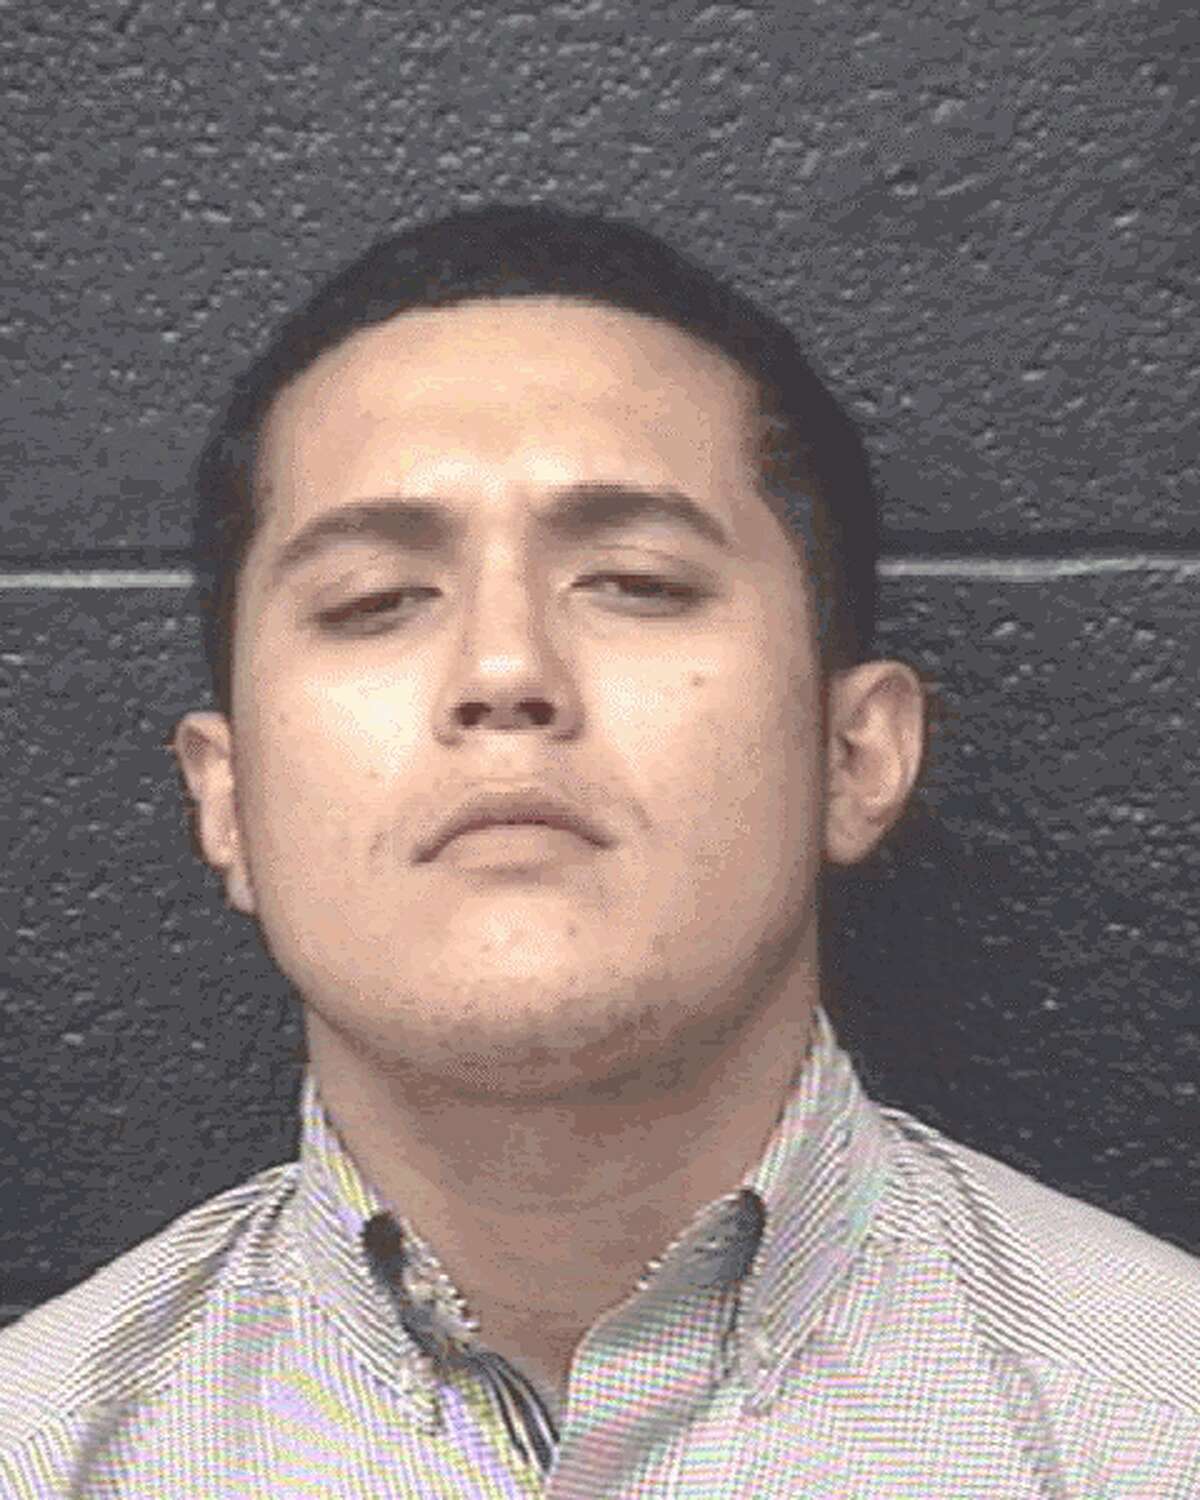 GARZA, OSCAR (W M) (20) years of age was arrested on the charge of HARASSMENT (OTHER THAN BY THREAT) (M), at 500 CROSSROADS ST, at 0005 hours on 12/4/2016